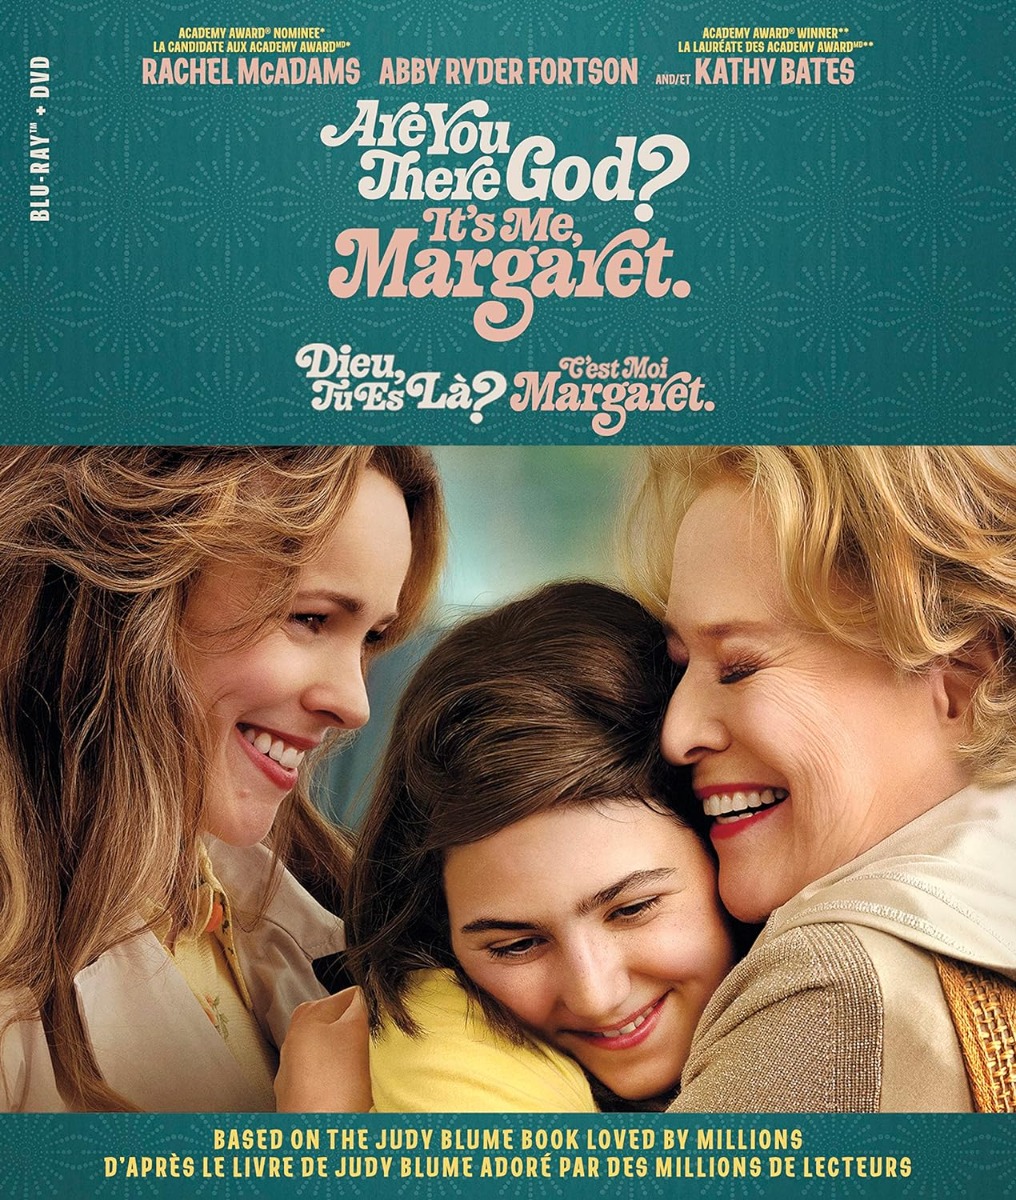 Are You There God? It's Me, Margaret [Blu-ray]